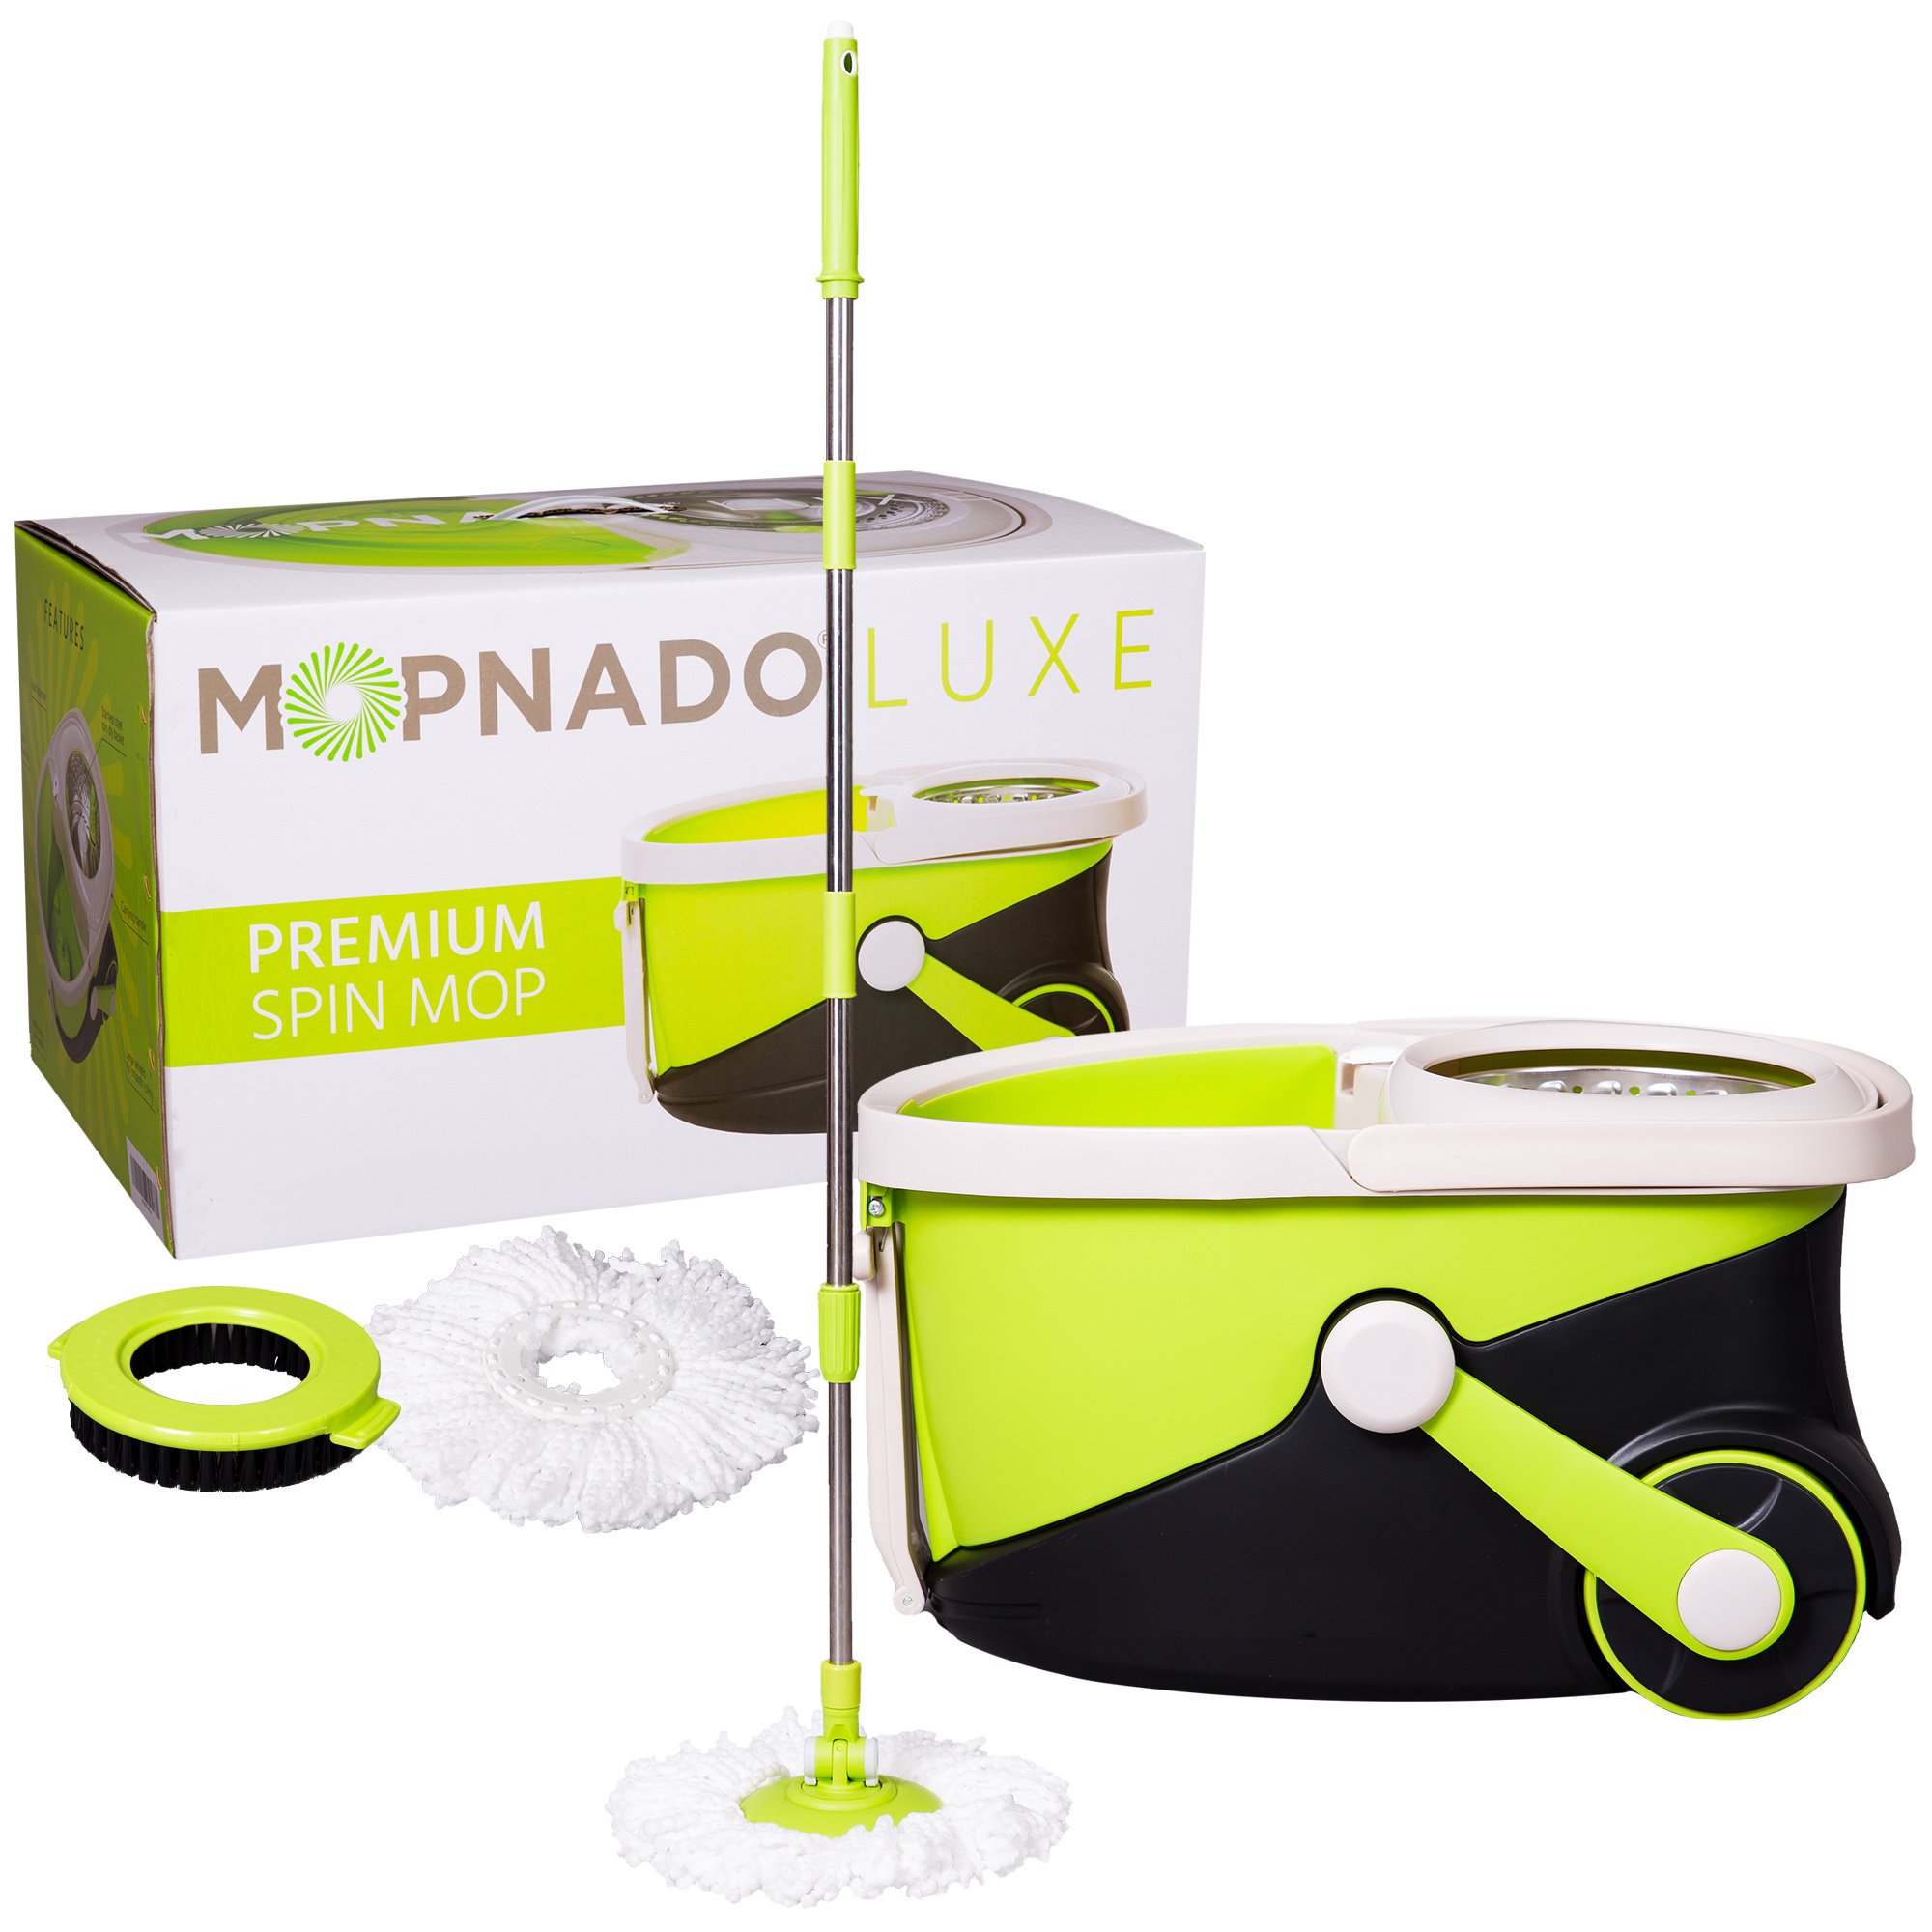 MOPNADO – Deluxe Stainless Steel Rolling Spin Mop System - 2 Replacement Microfiber Mop Heads and Brush Attachment – Walkable with Wheels - Perfect For All Floor Types - Home and Commercial Use - image 1 of 7